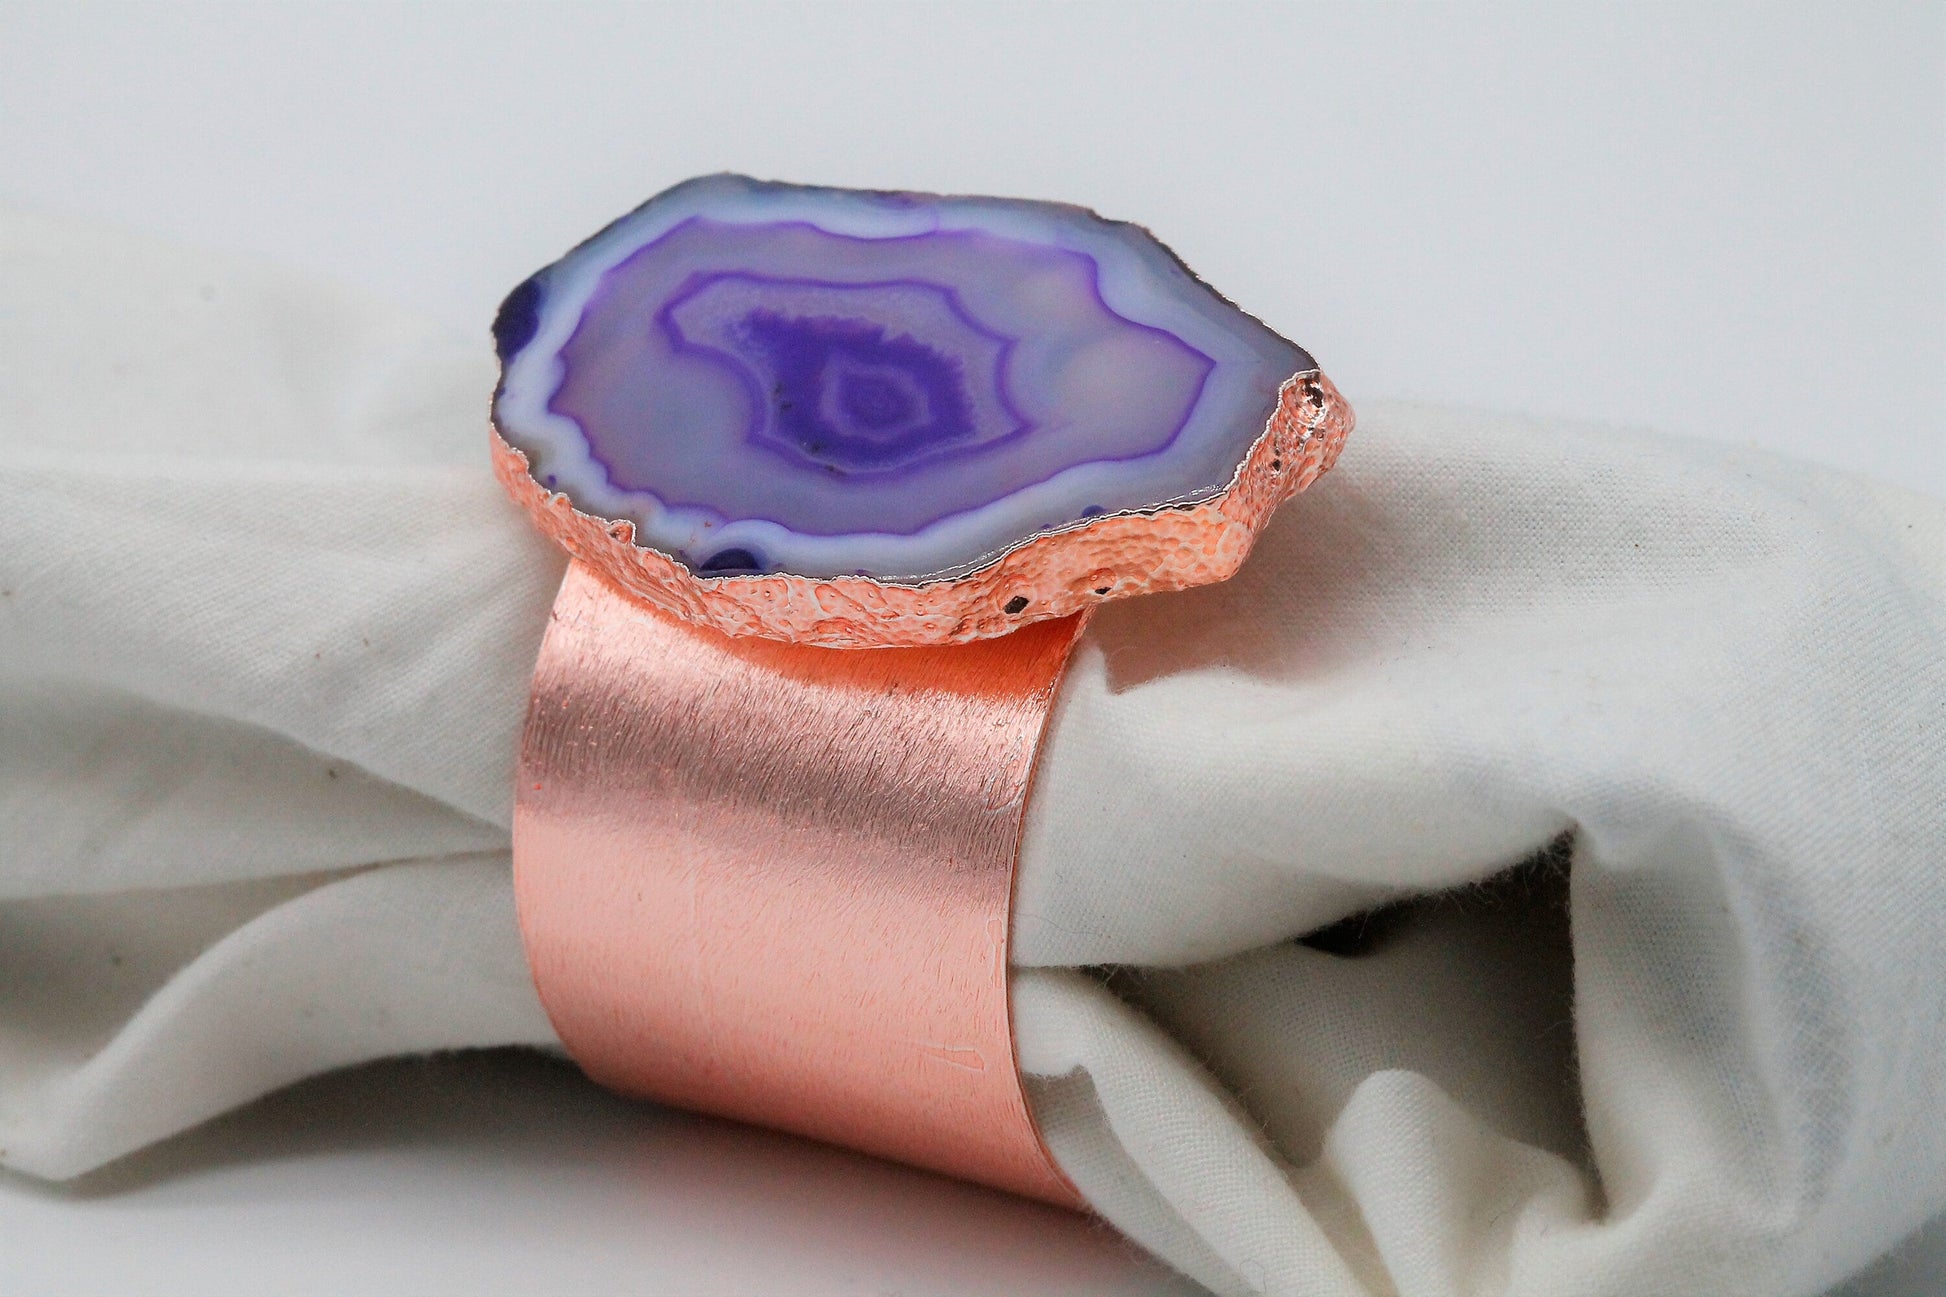 Chic Napkin Ring, Natural Gemstone Agate Handmade, Home And Table Decor Set of 4/6/12 or More - Meena Design